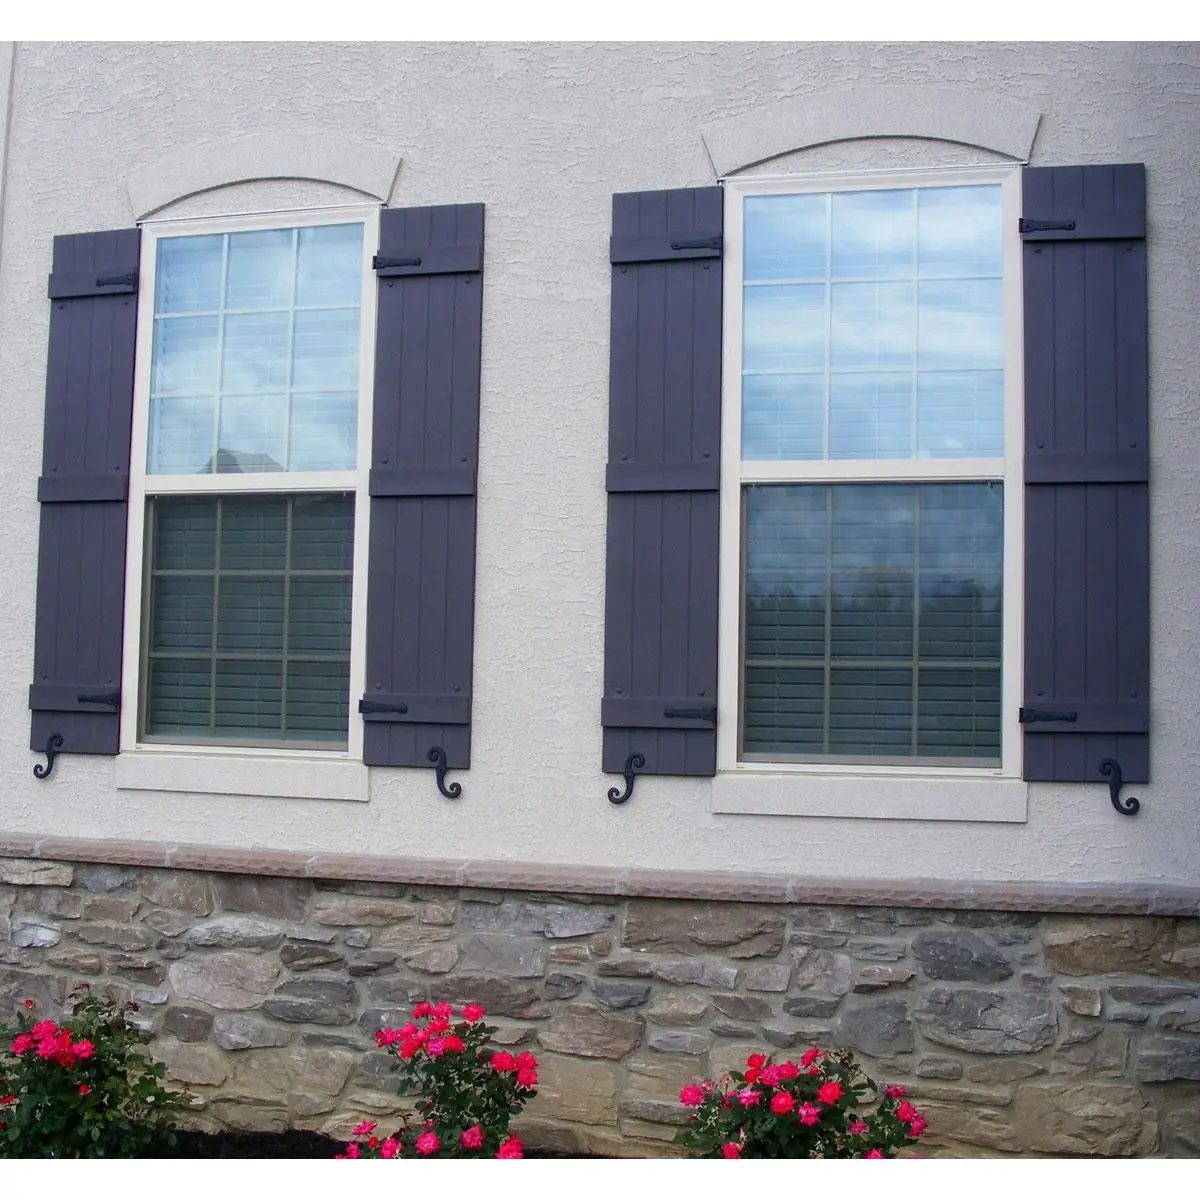 Choosing the right accessories for exterior shutters